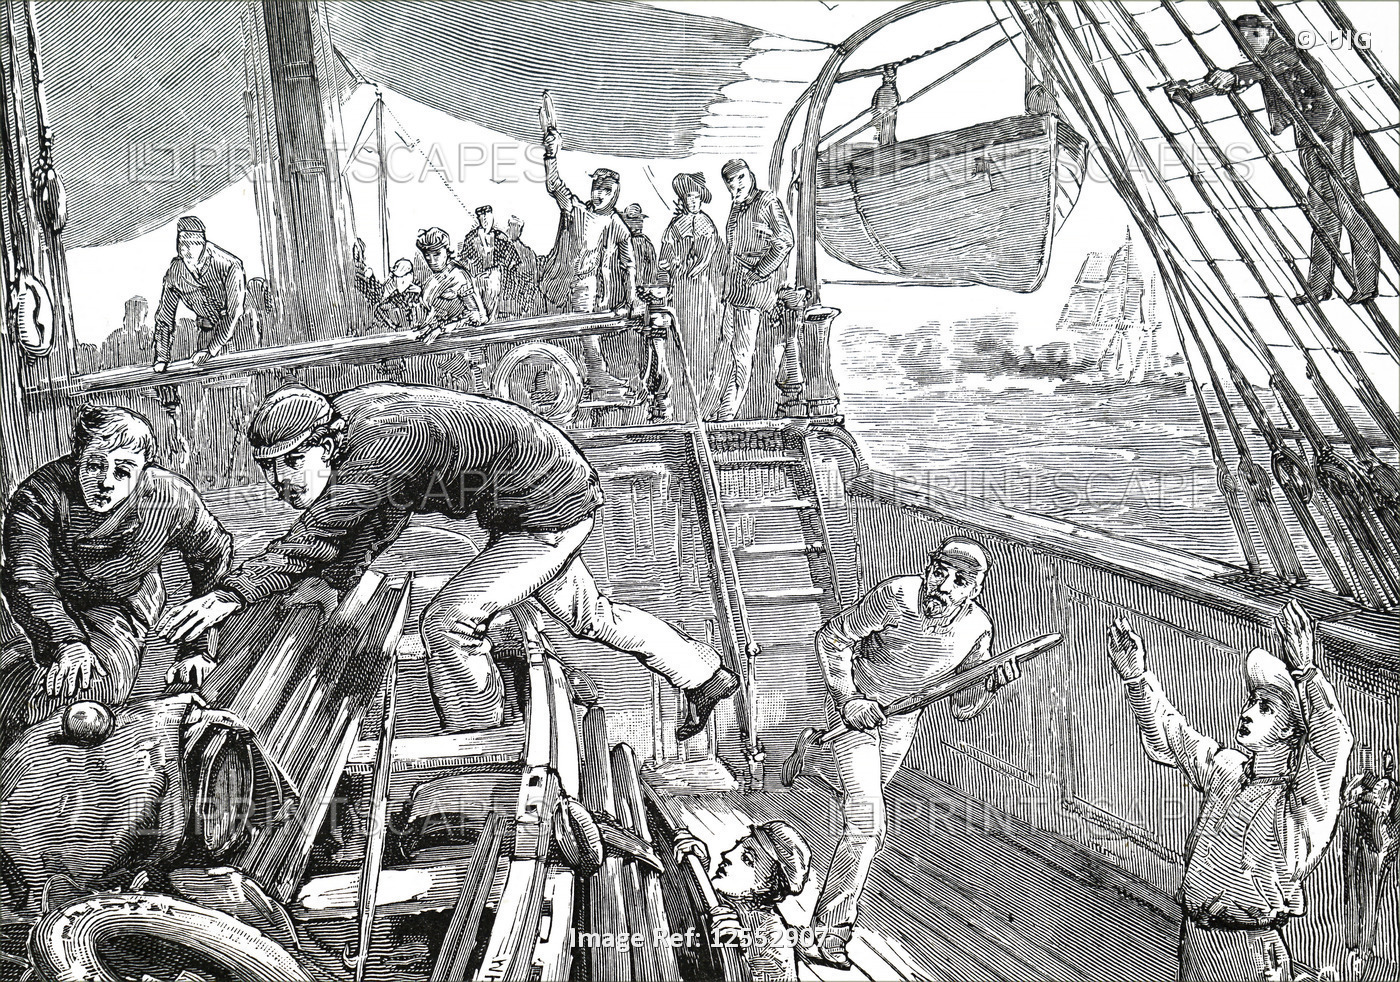 Illustration depicting crewmen playing deck cricket on a liner, 19th century